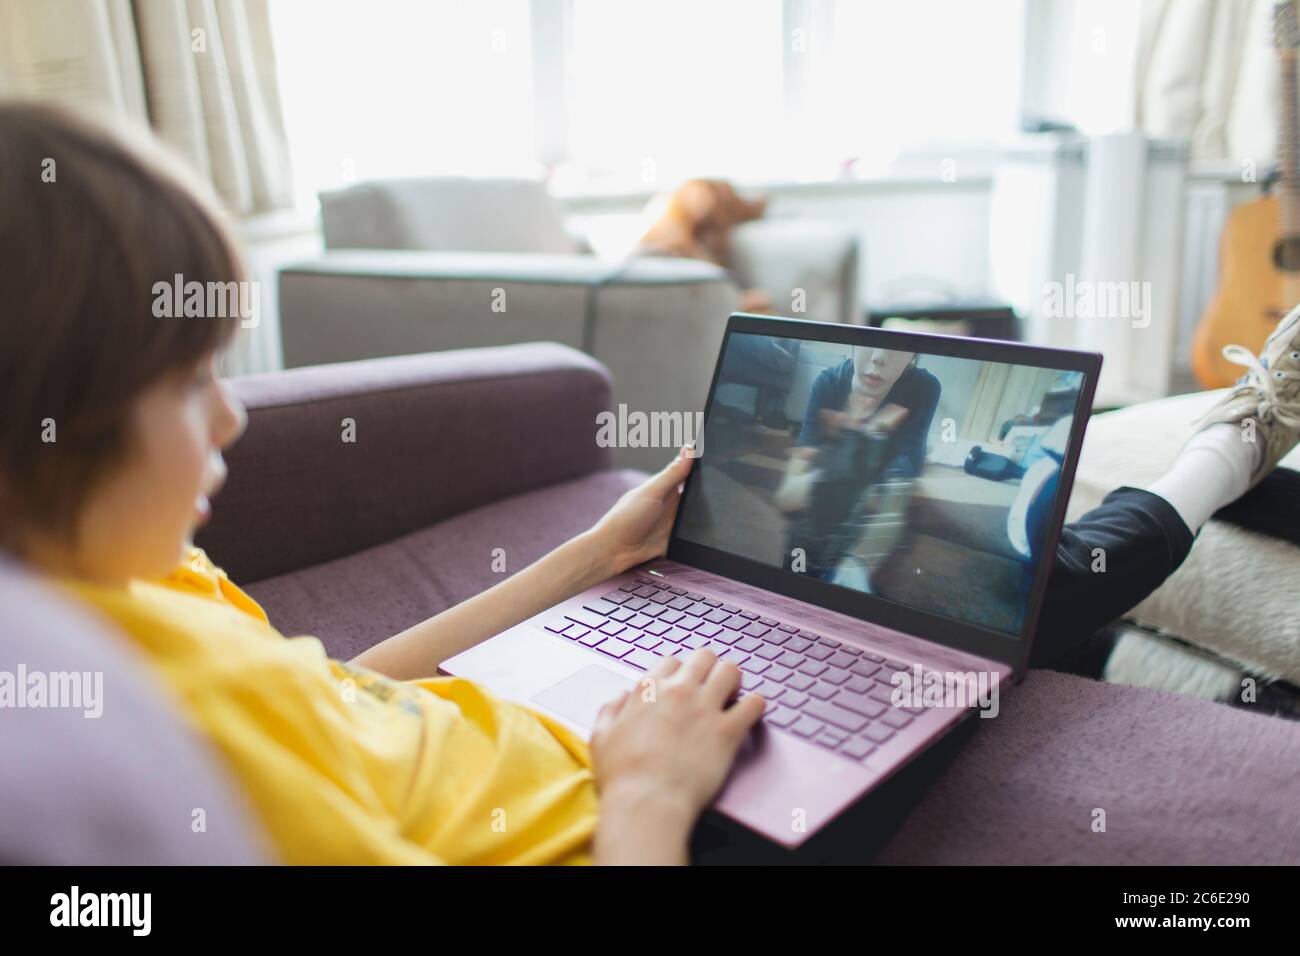 Boy video chatting with friend on laptop Stock Photo